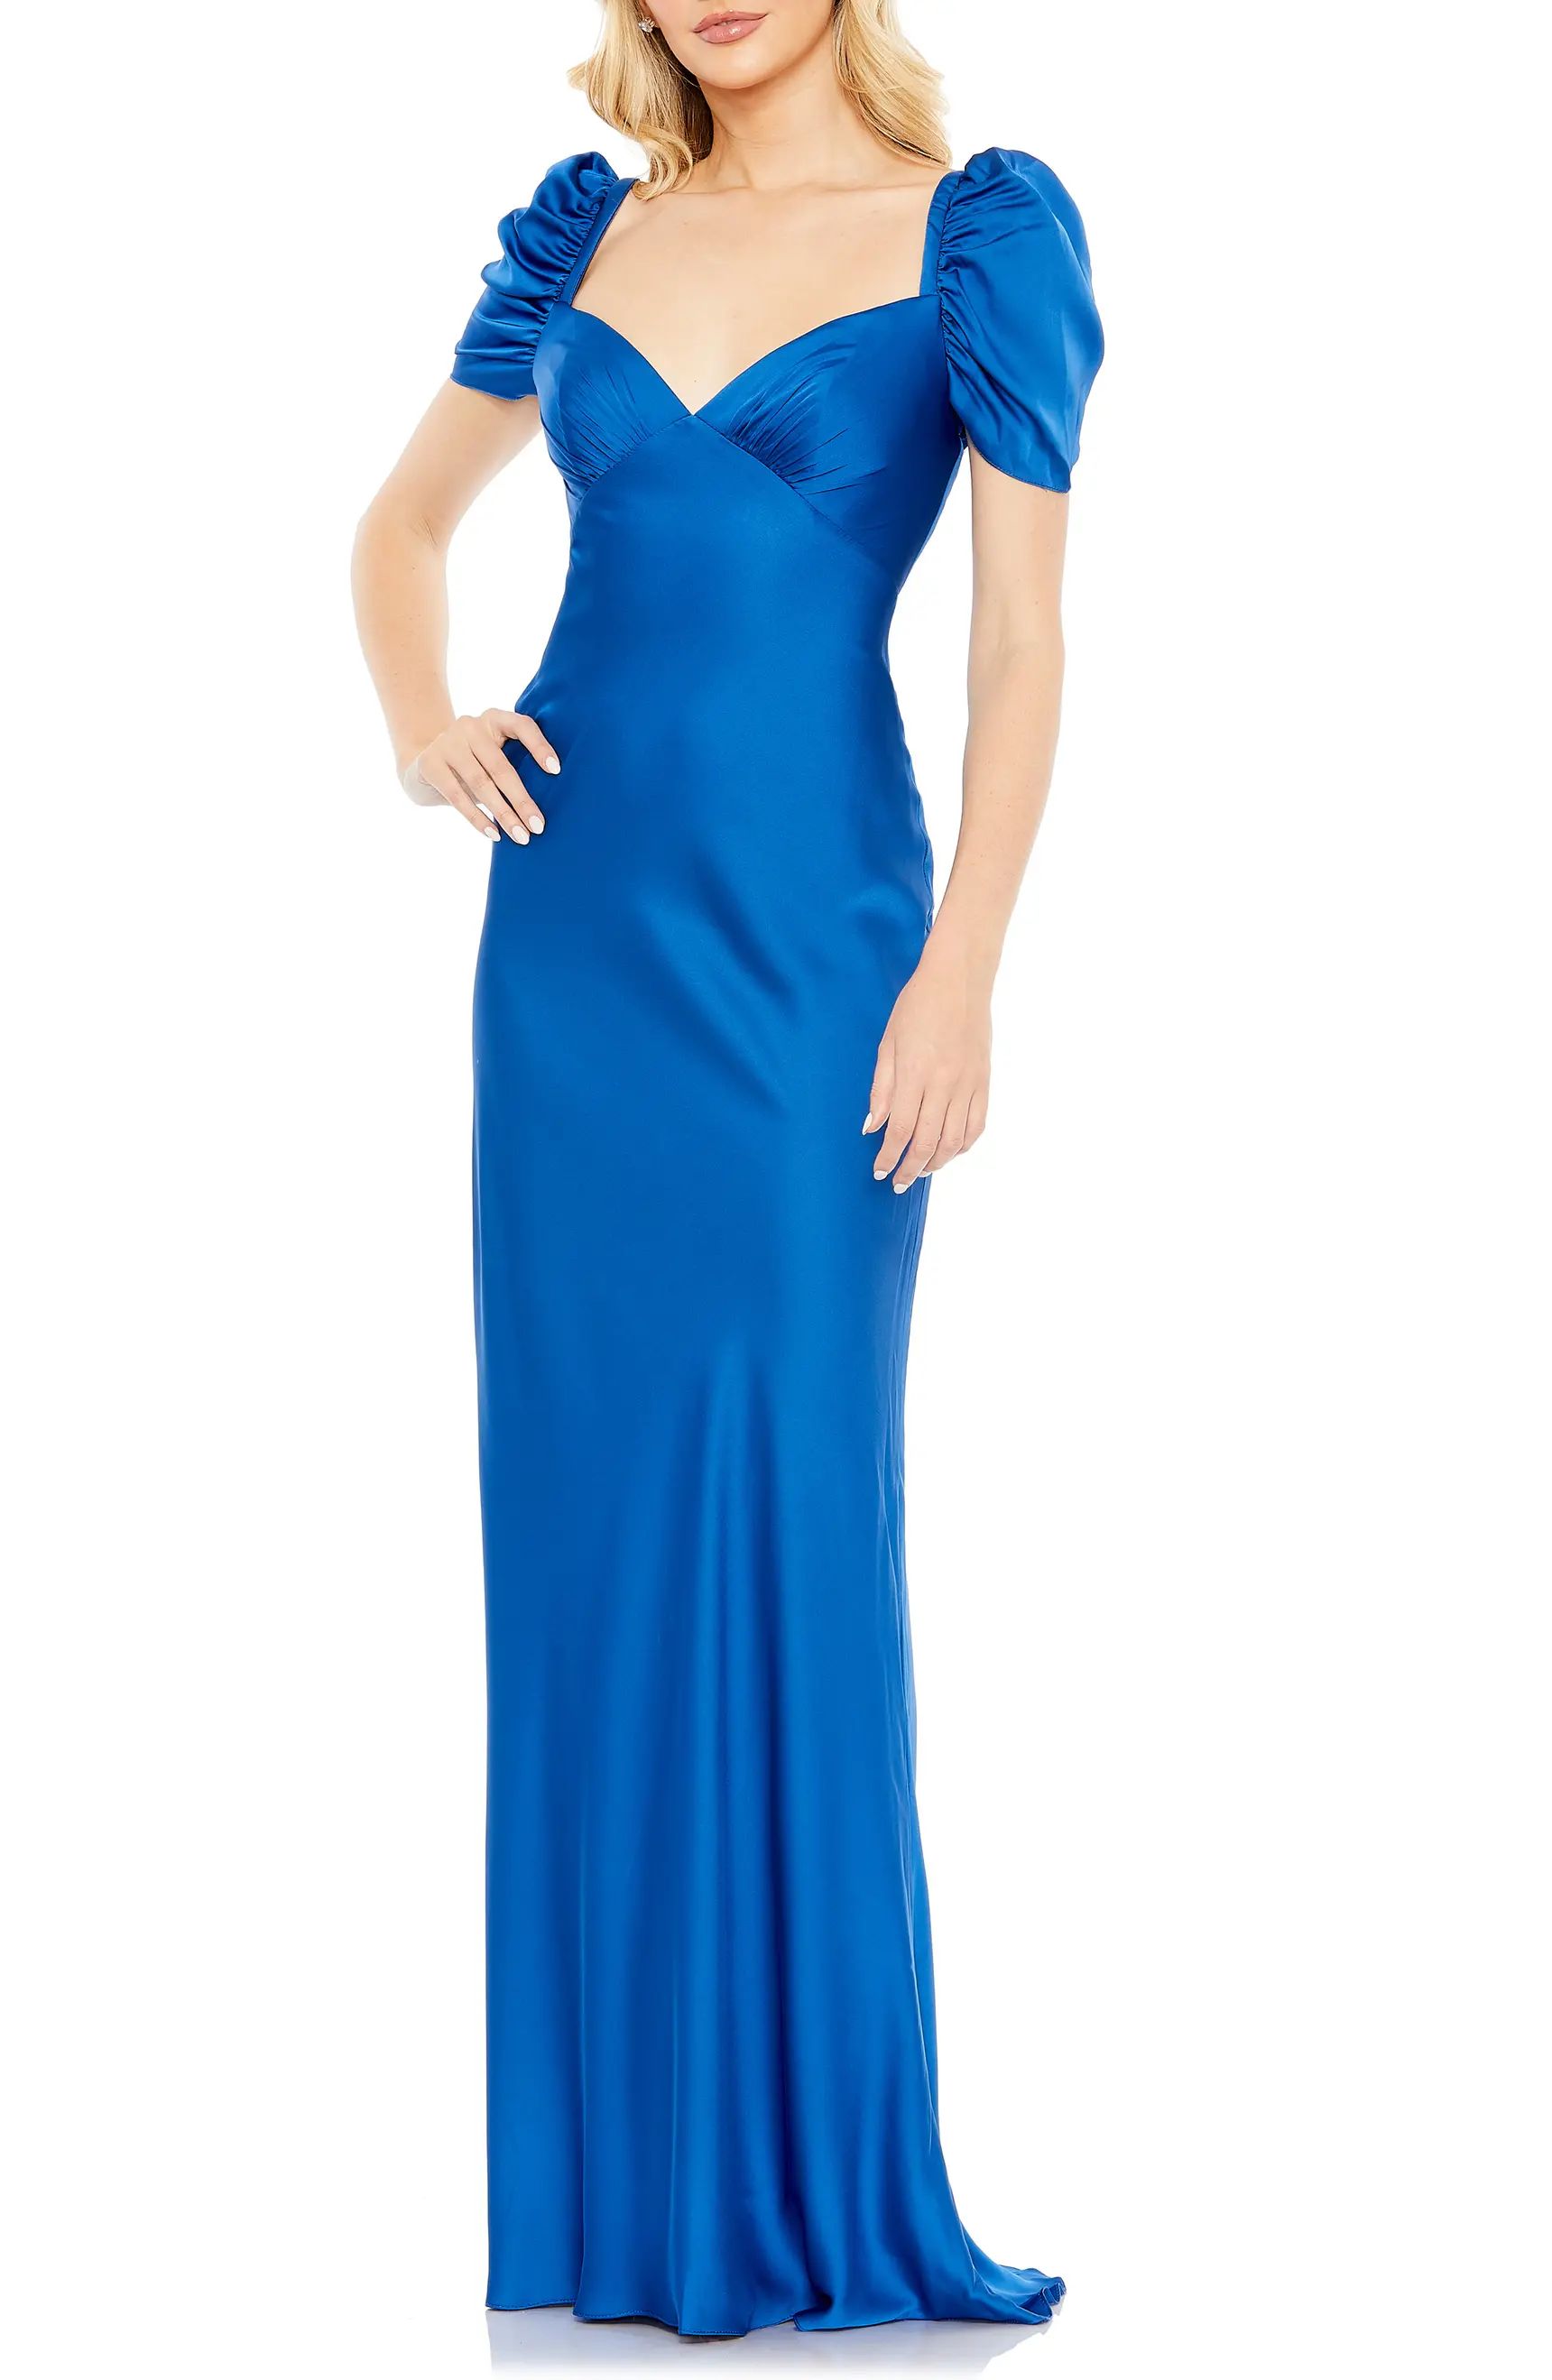 Ieena for Mac Duggal Sweetheart Neck Satin Charmeuse Gown | Nordstrom | Nordstrom